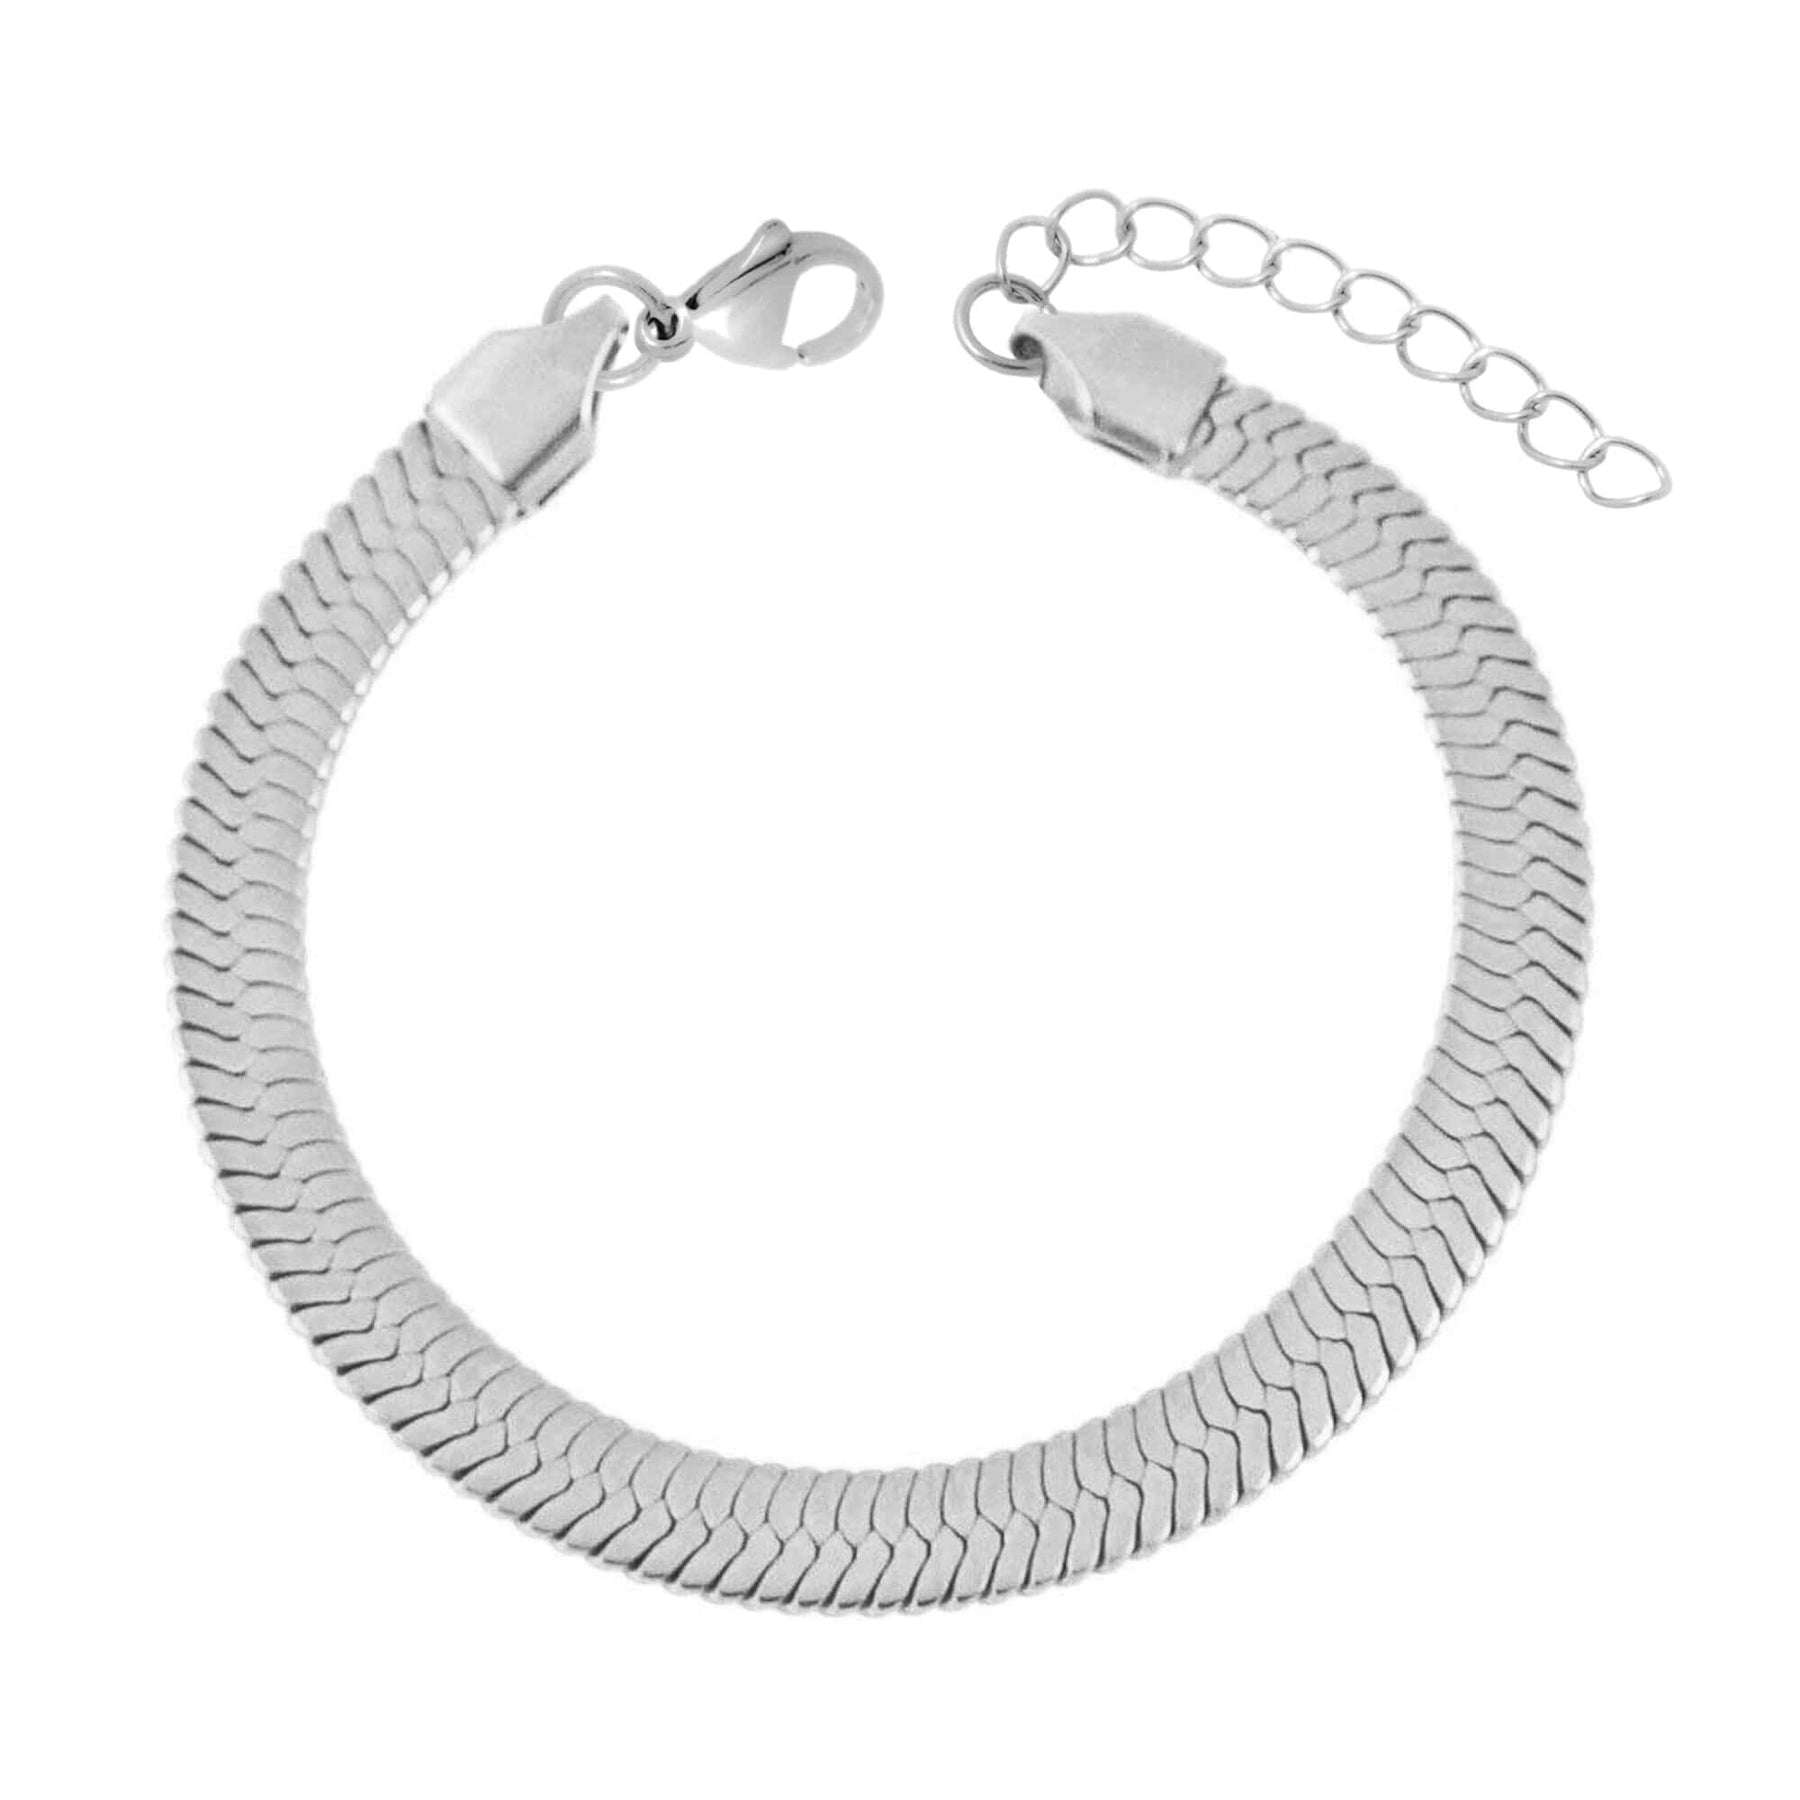 BohoMoon Stainless Steel Sophie Anklet Silver